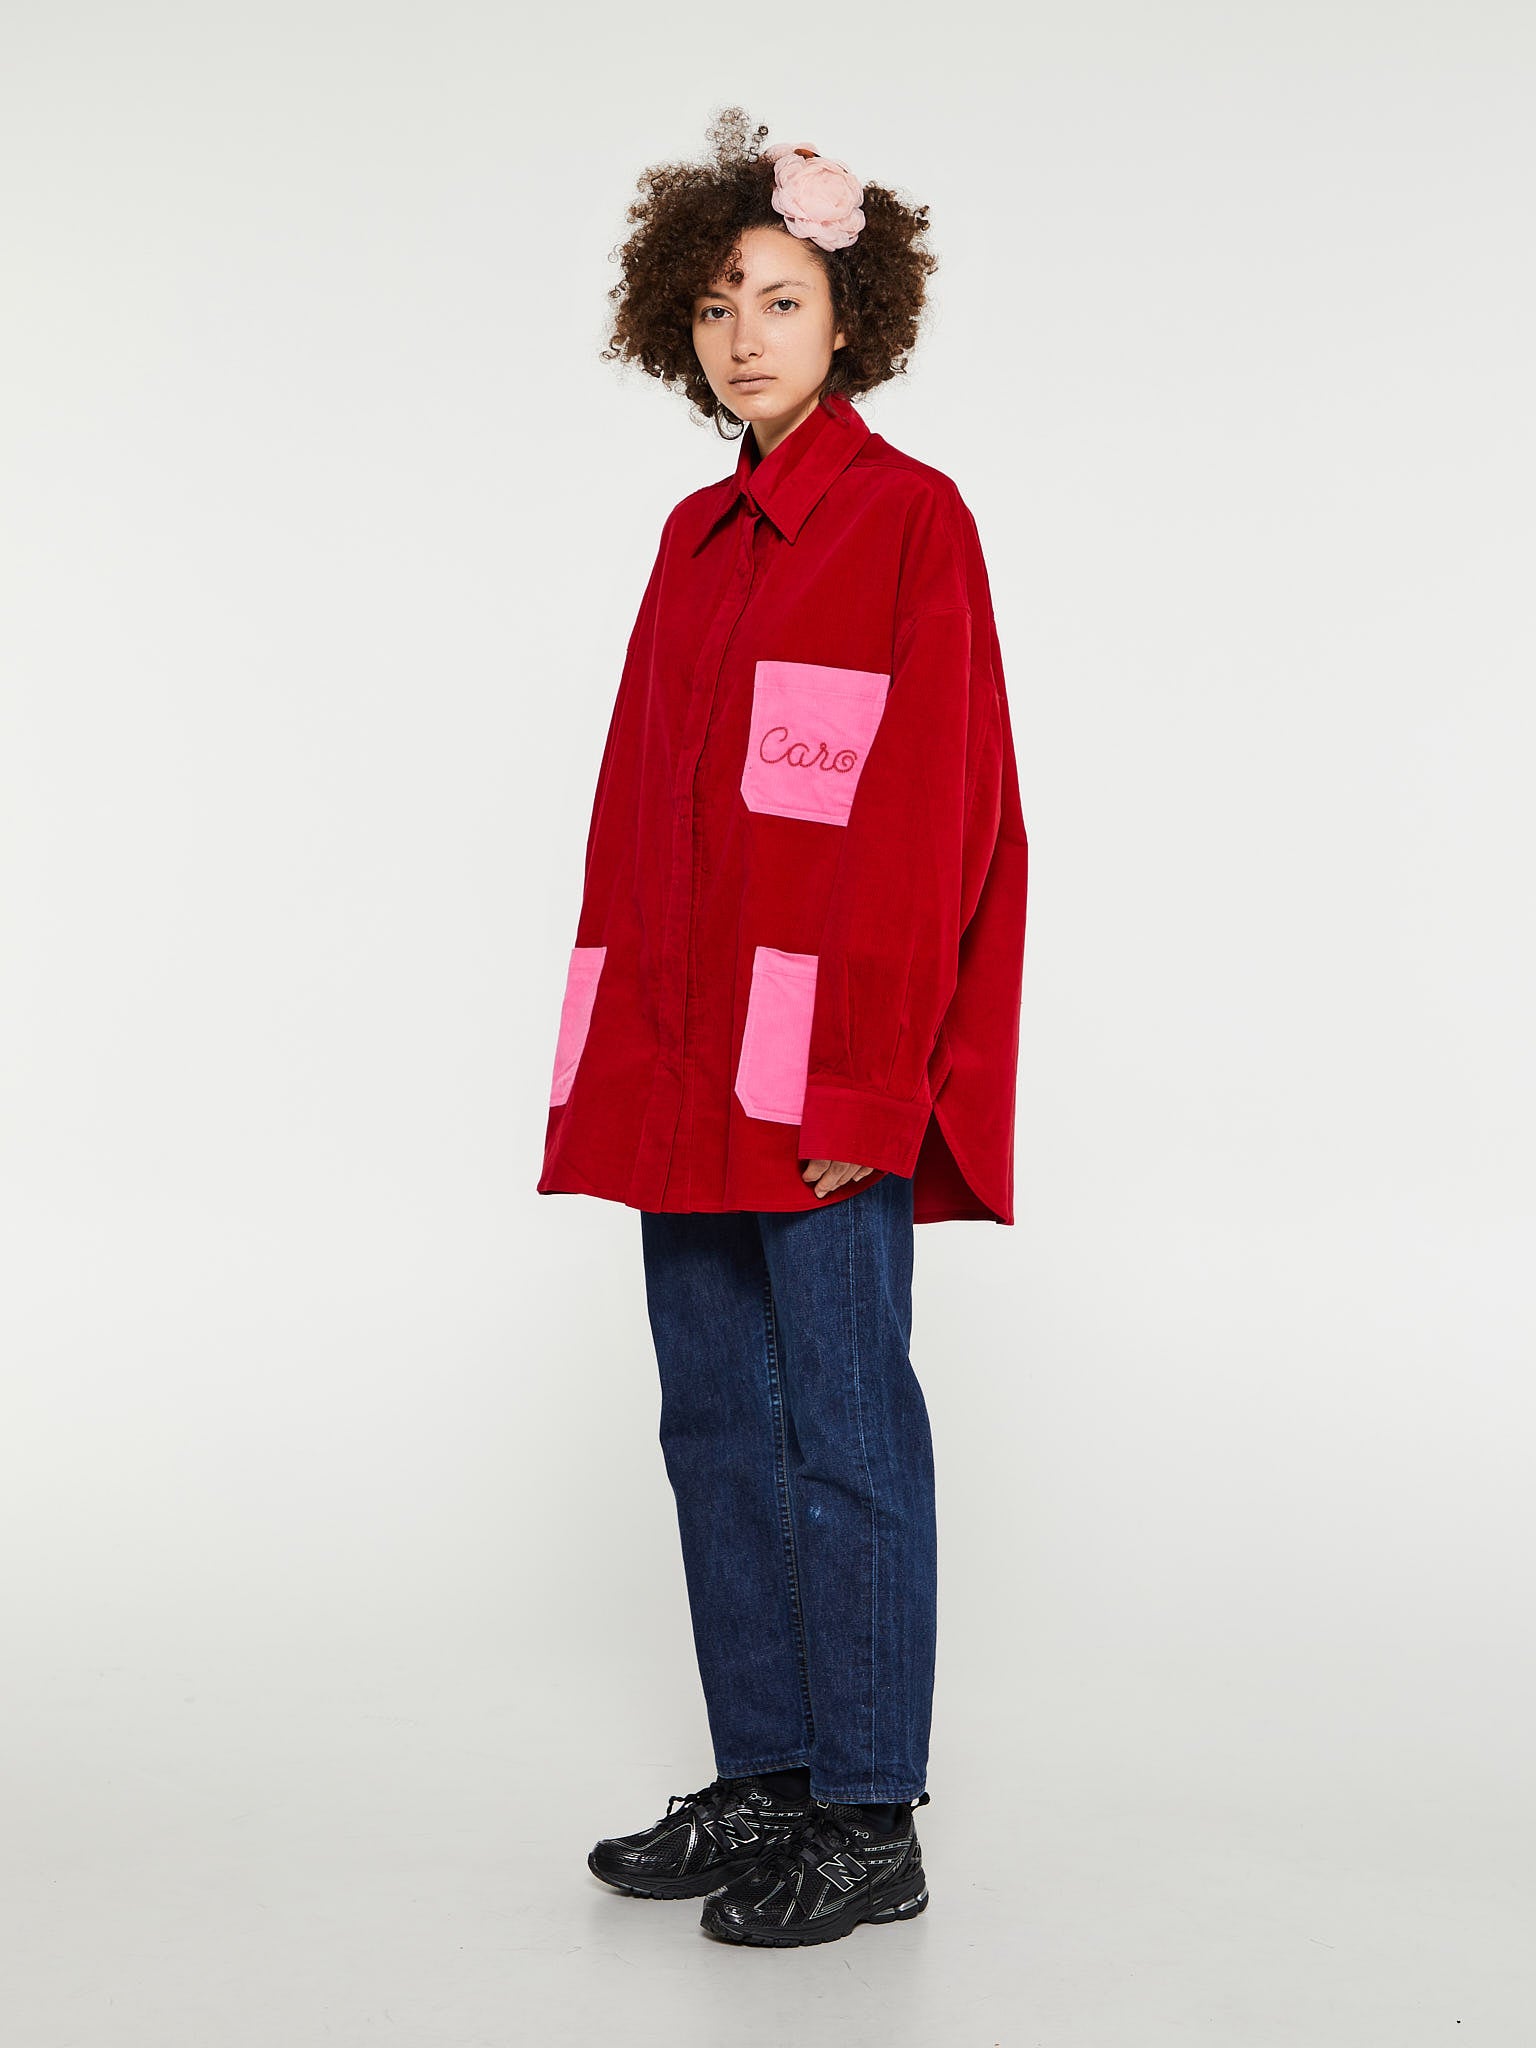 Frederik Shirt in Red With Pink